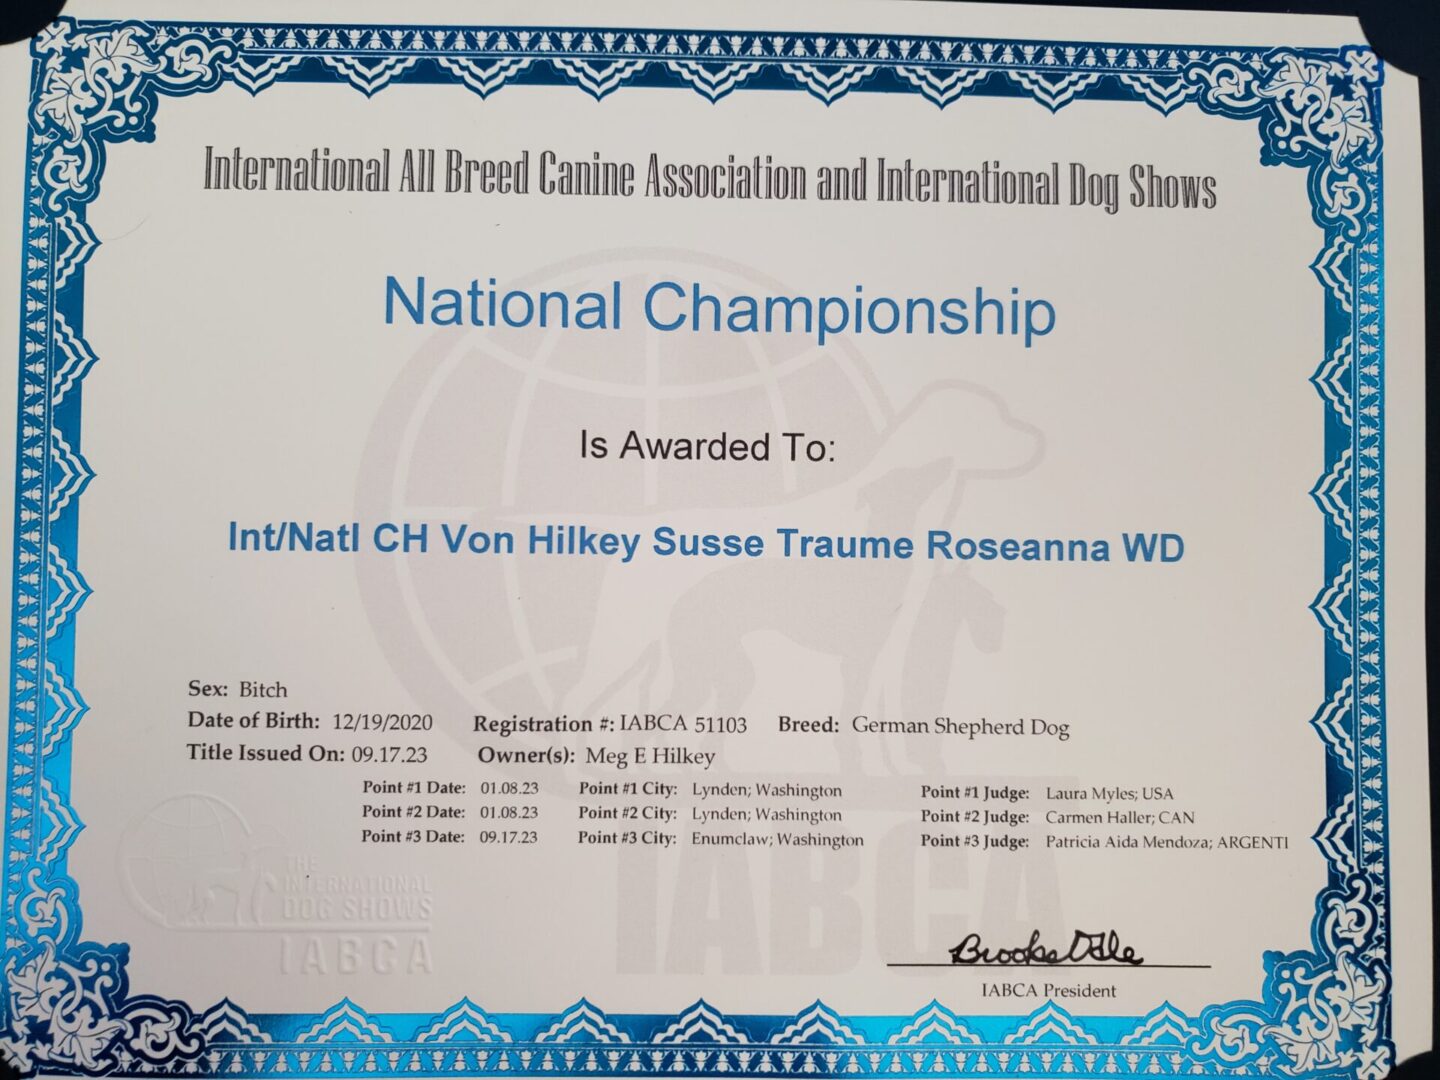 A certificate of recognition for the international dog show.